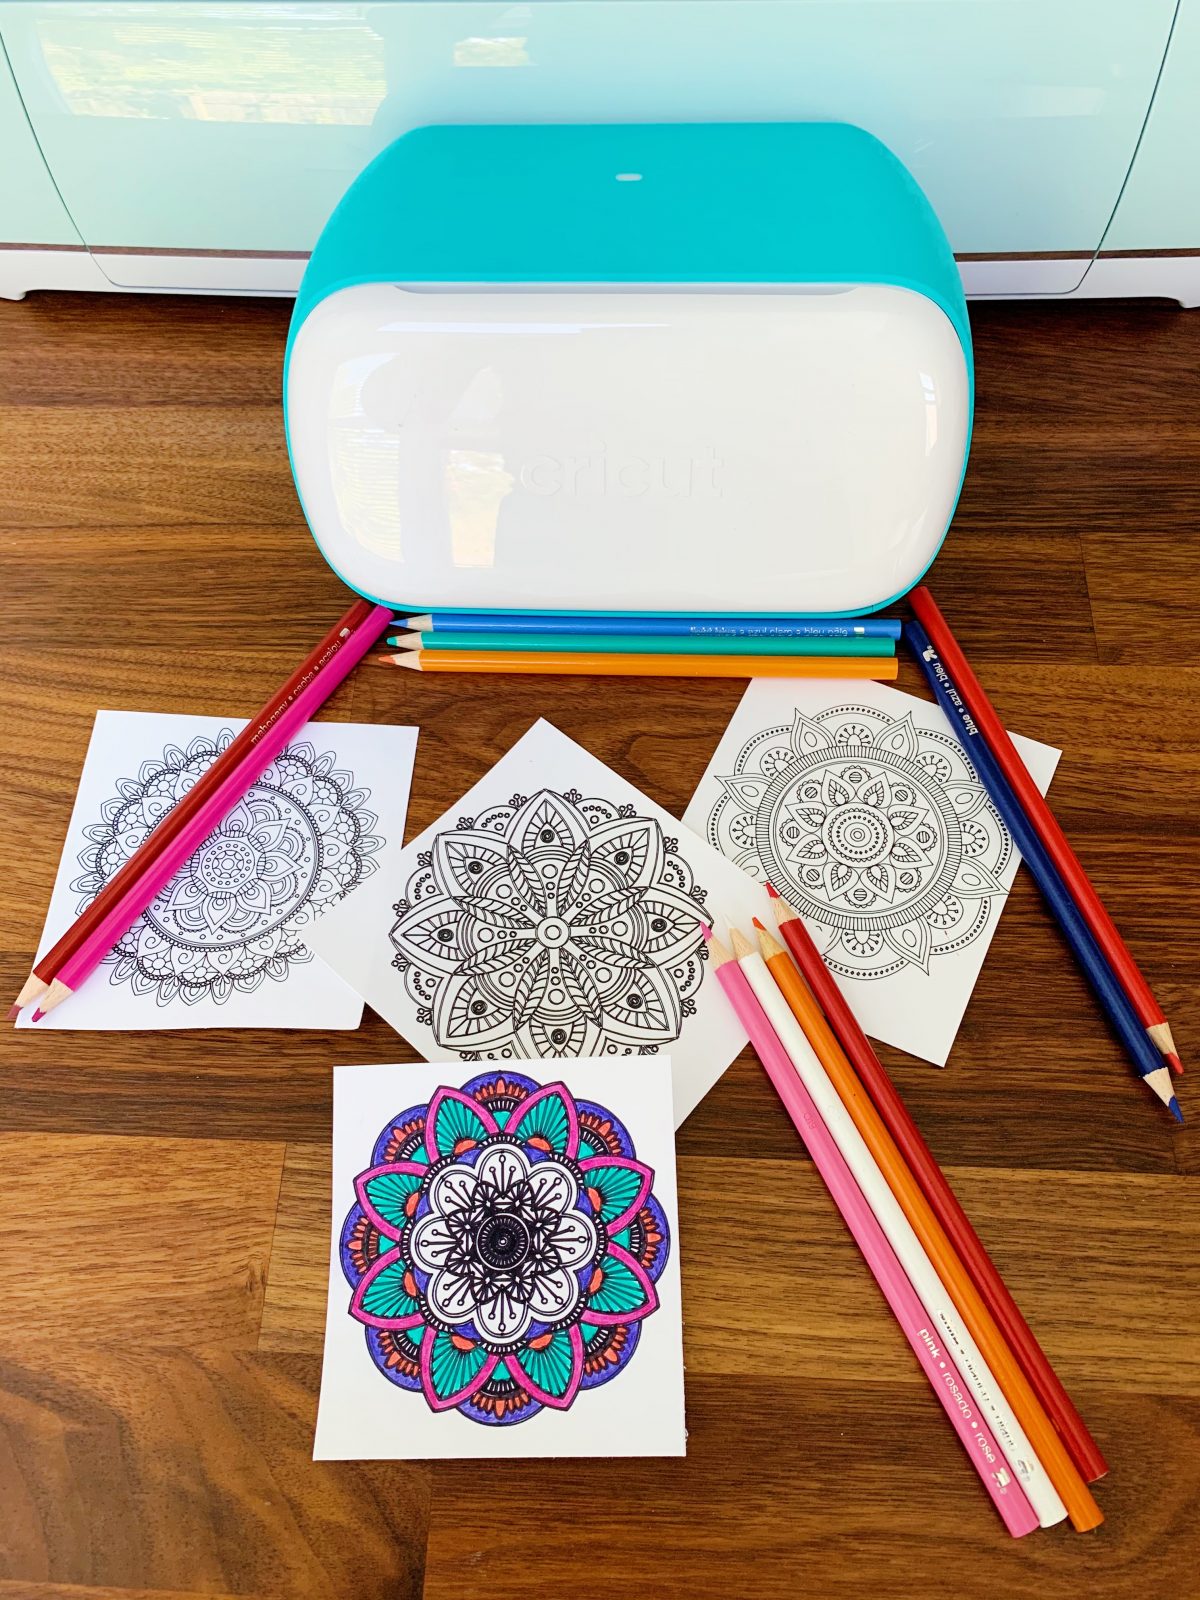 How to Make Mandala Coloring Pages with Cricut